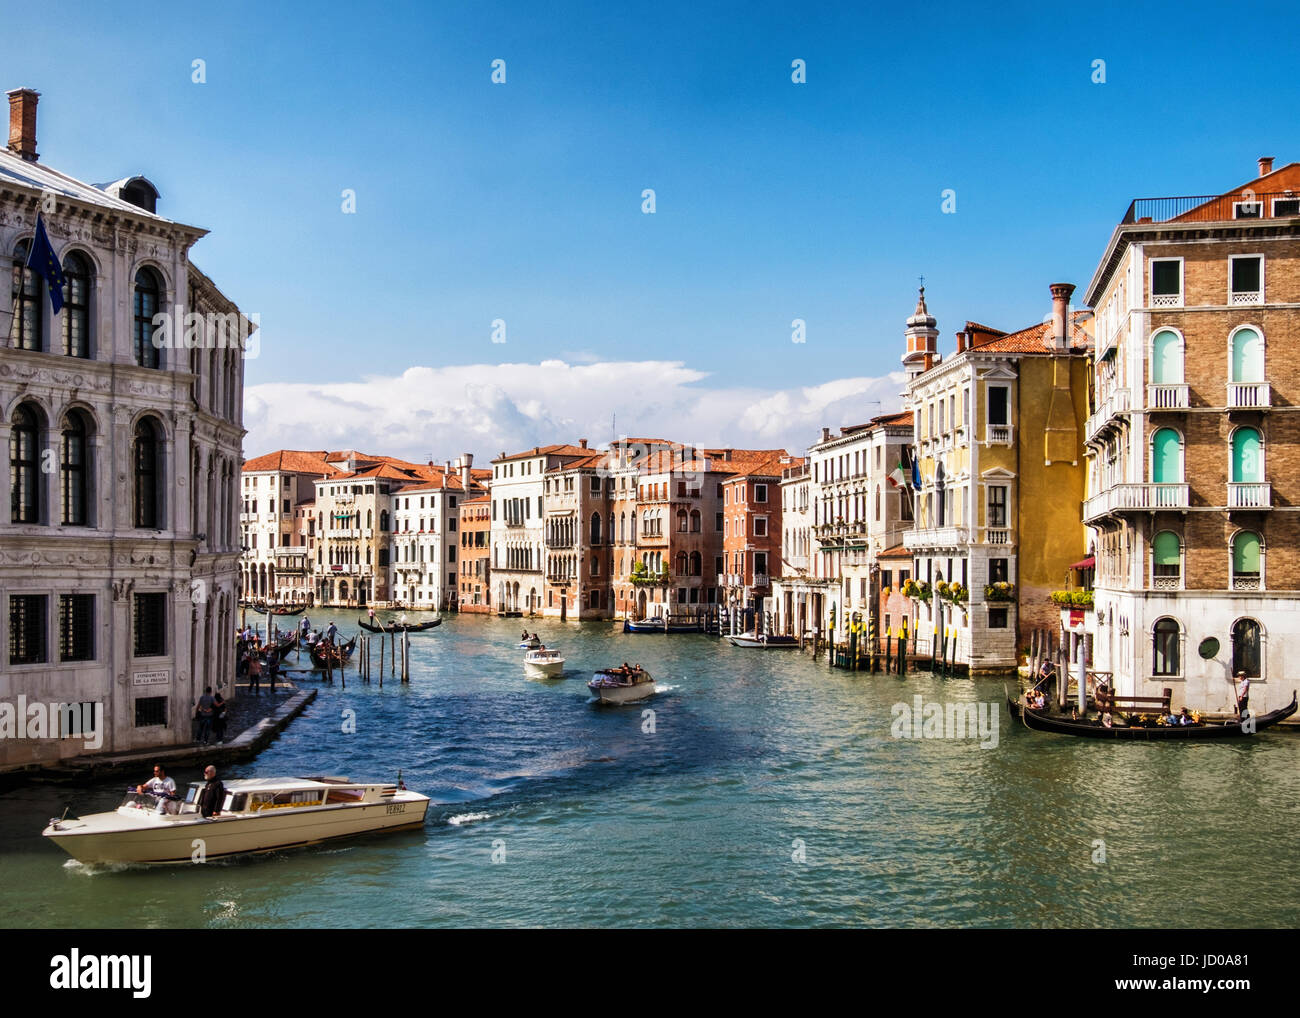 Venice, San Marco.Grand Canal, Typical Venetian landscape view with weathered houses and grand palazzos,church steeple,water taxis and gondolas Stock Photo